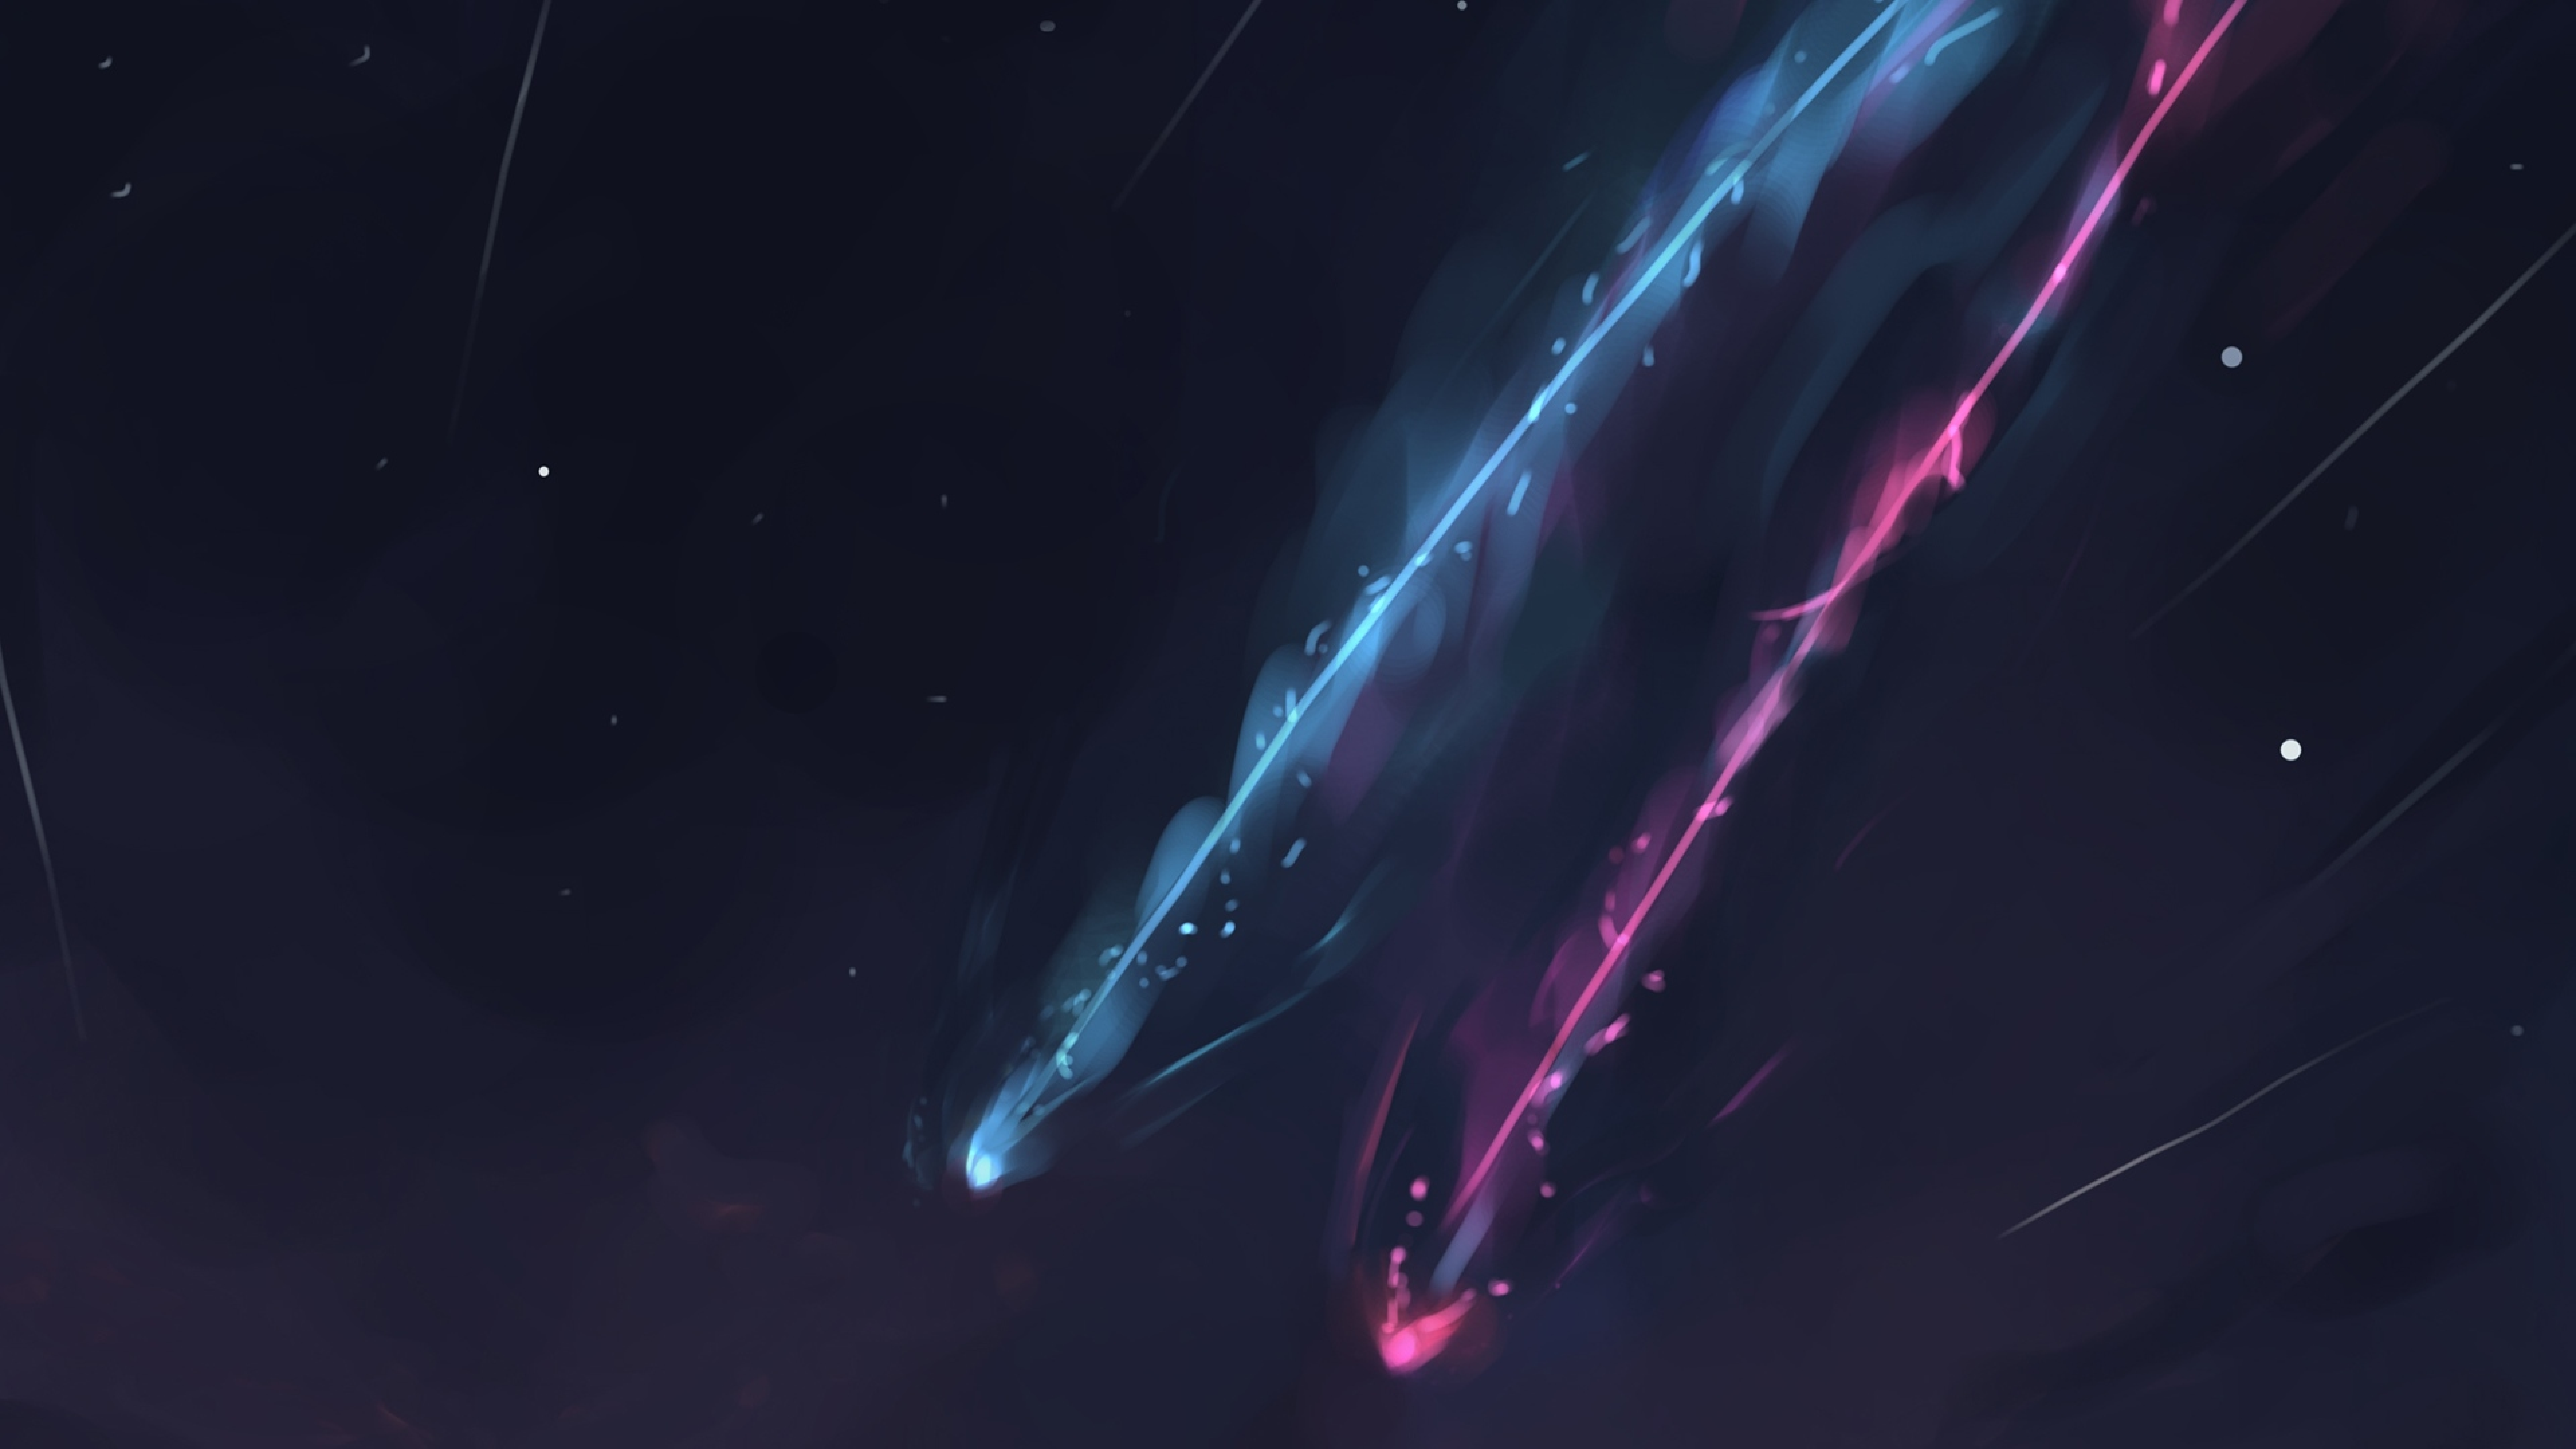 Your Name Anime Abstract Painting 8K Wallpaper, HD